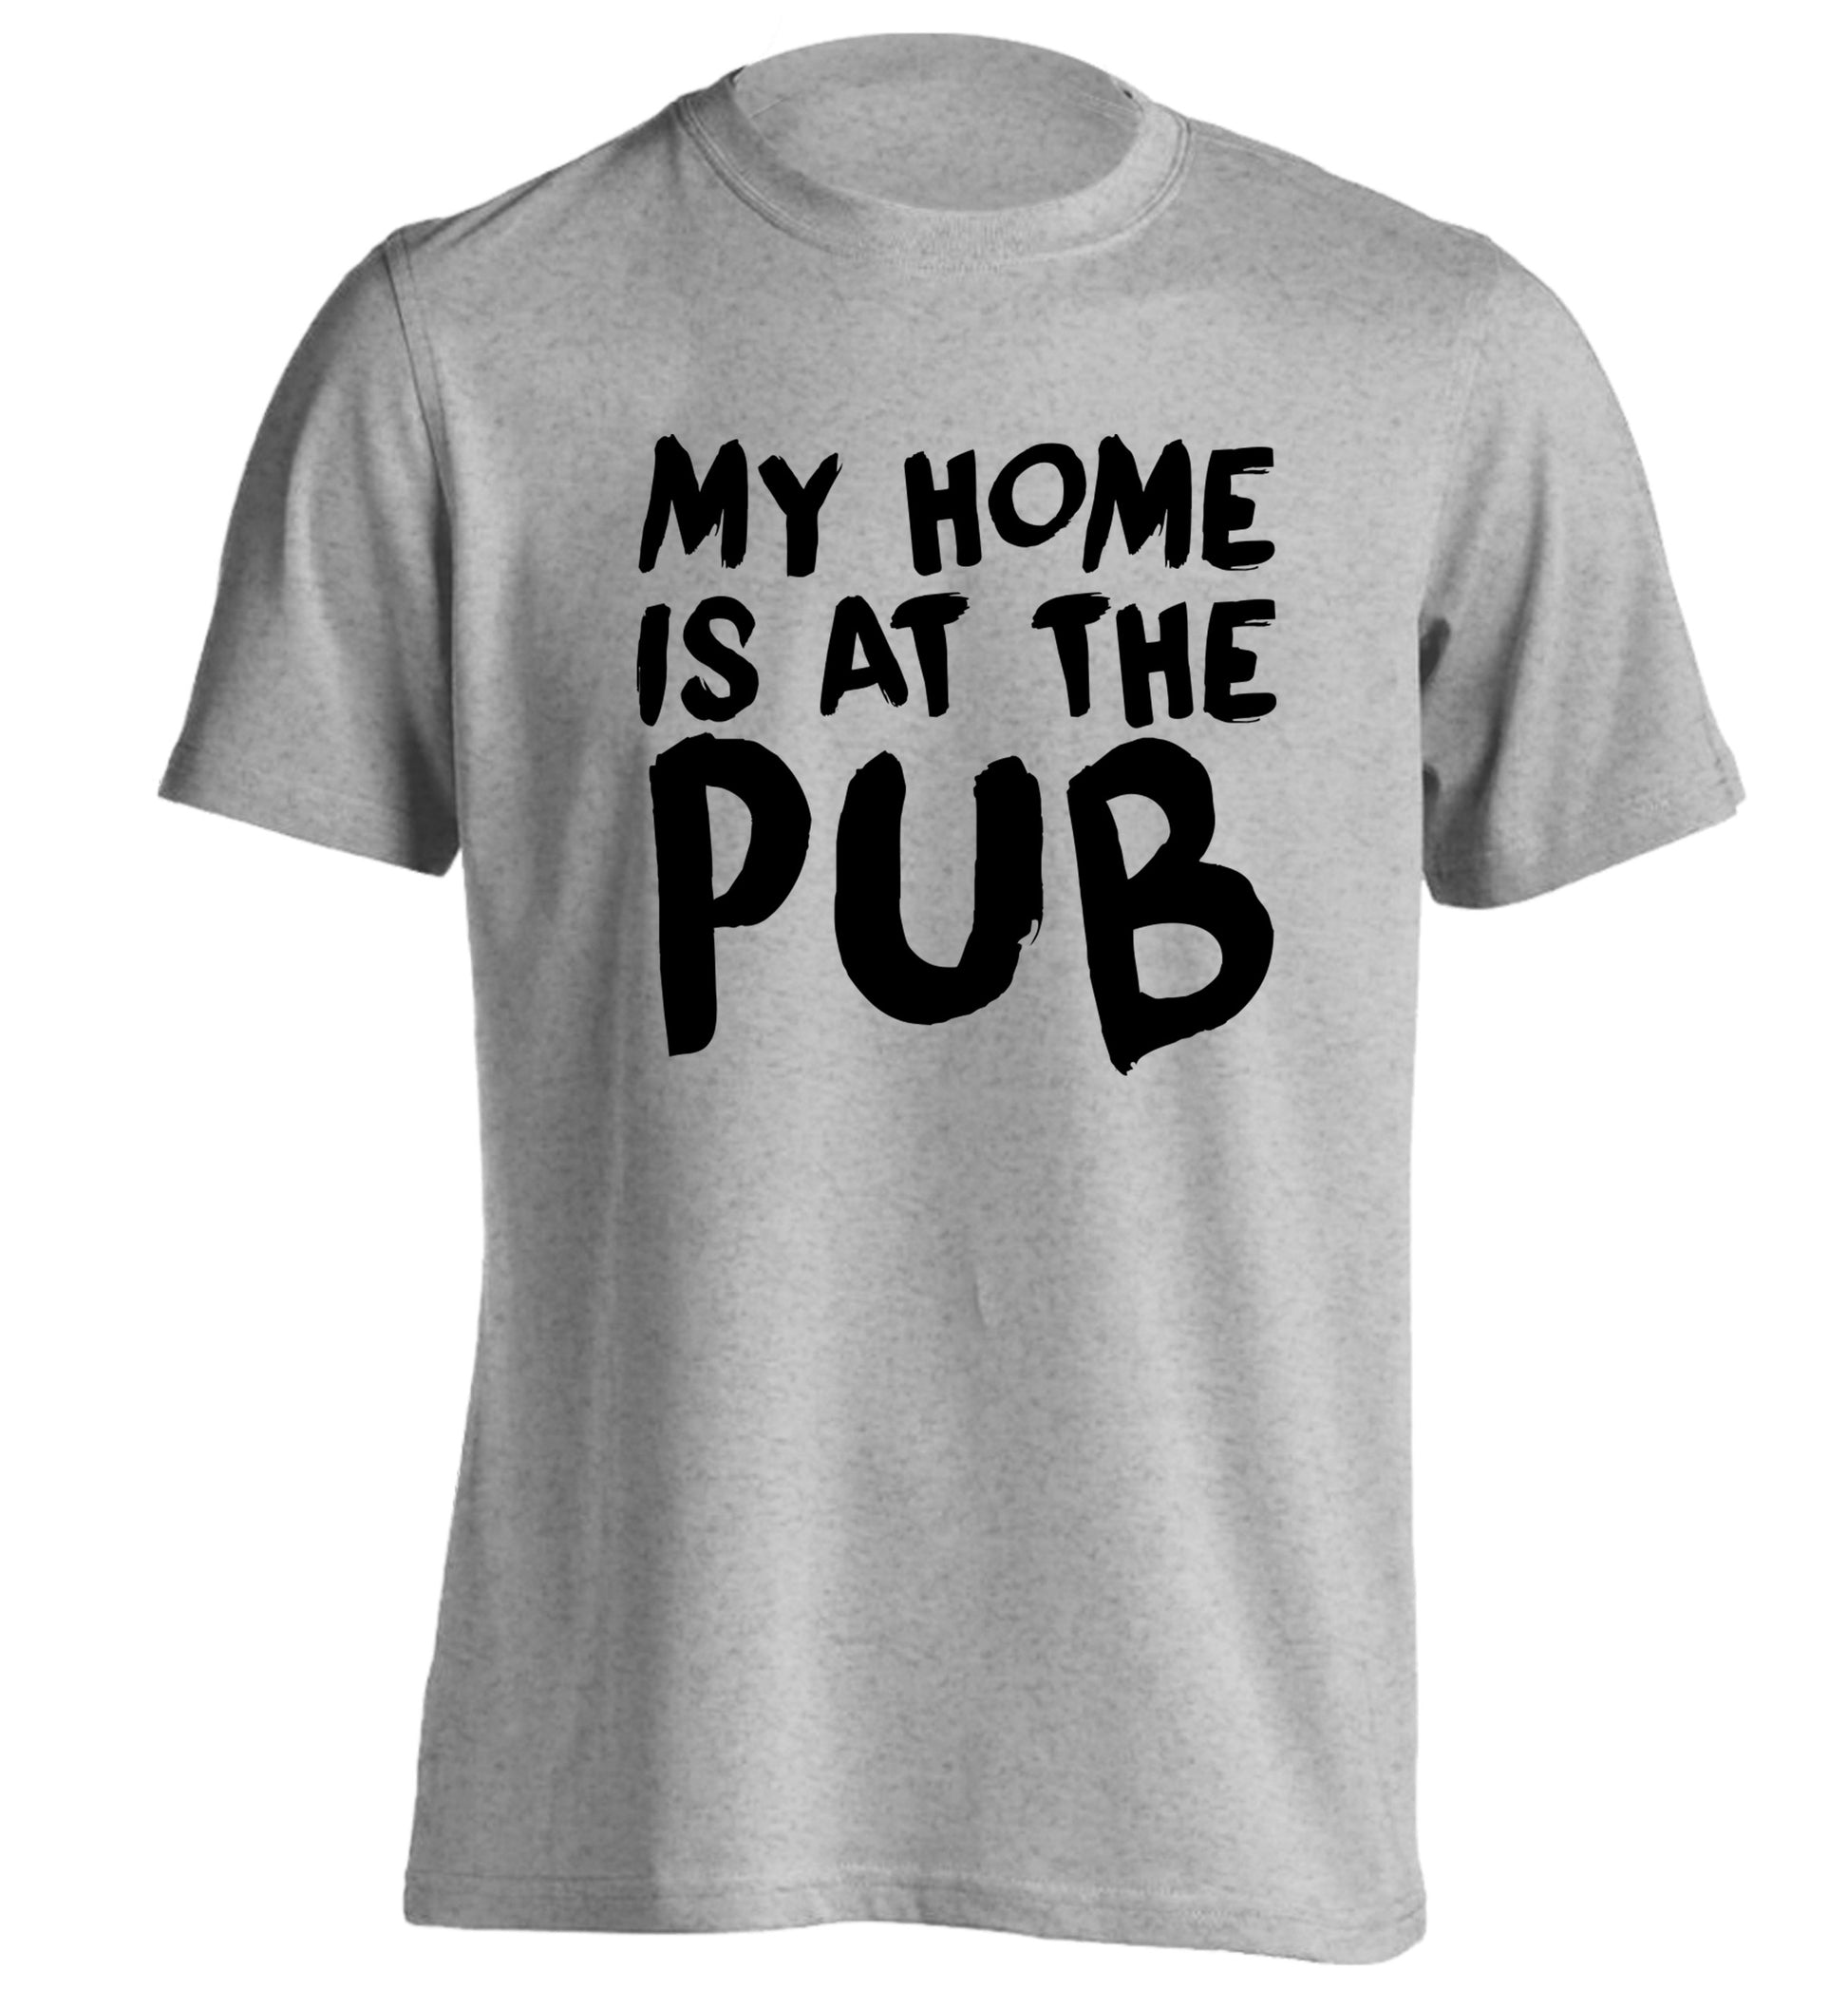 My home is at the pub adults unisex grey Tshirt 2XL